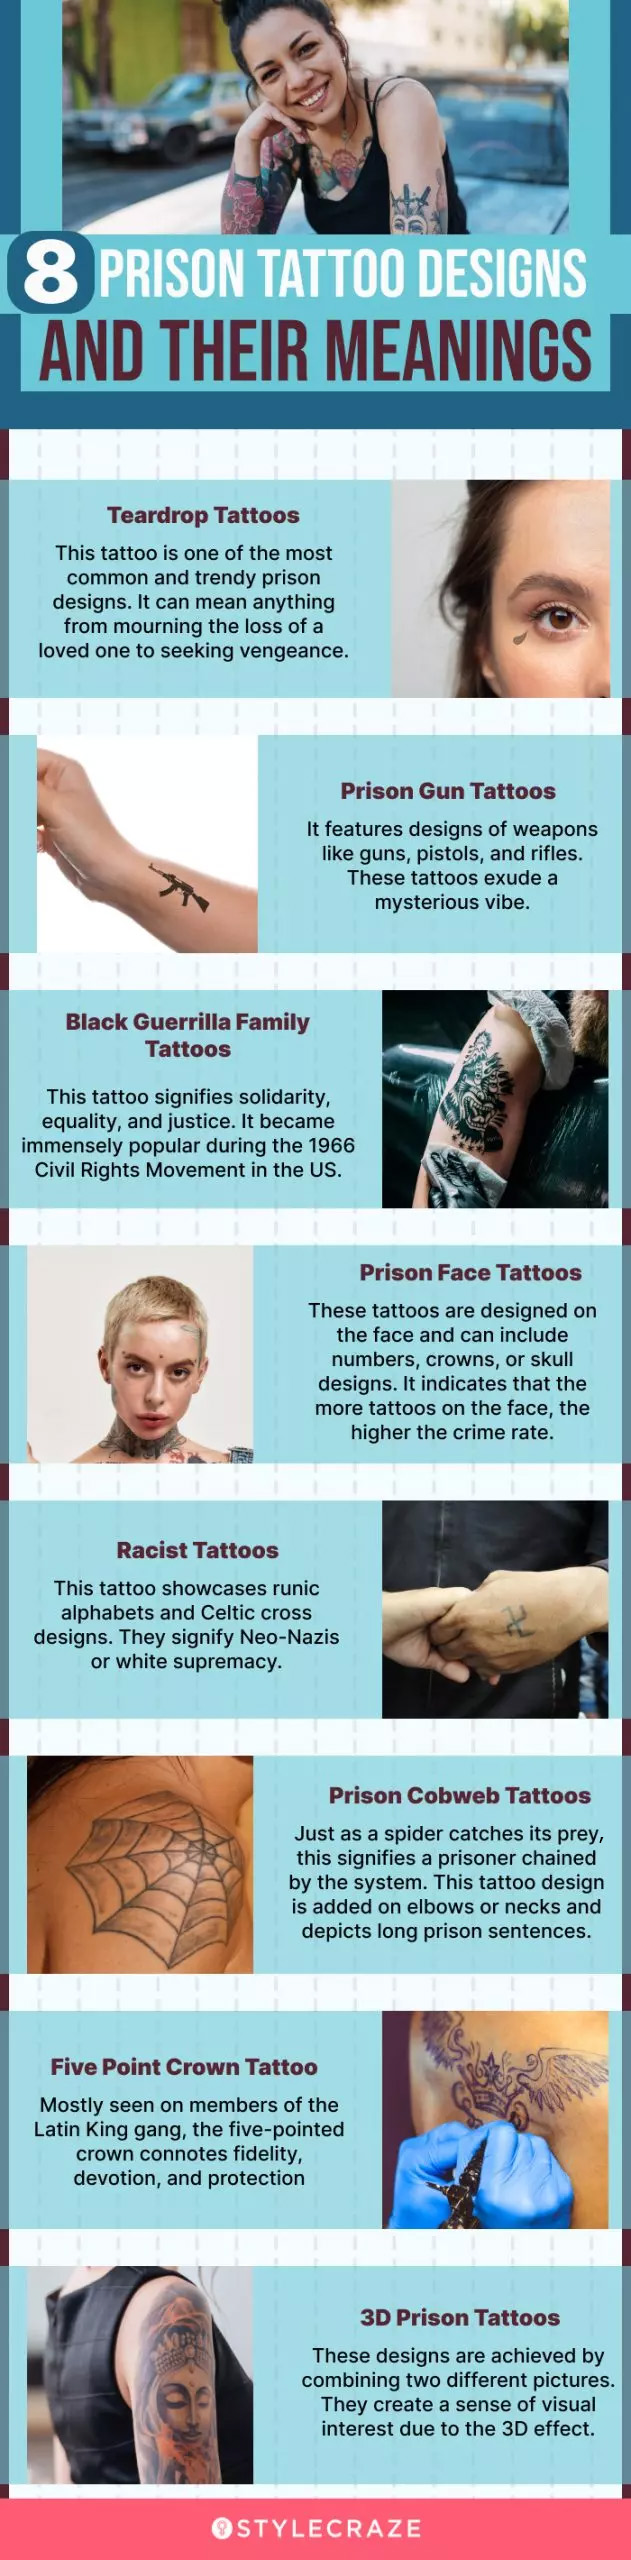 8 prison tattoo designs and their meanings (infographic)